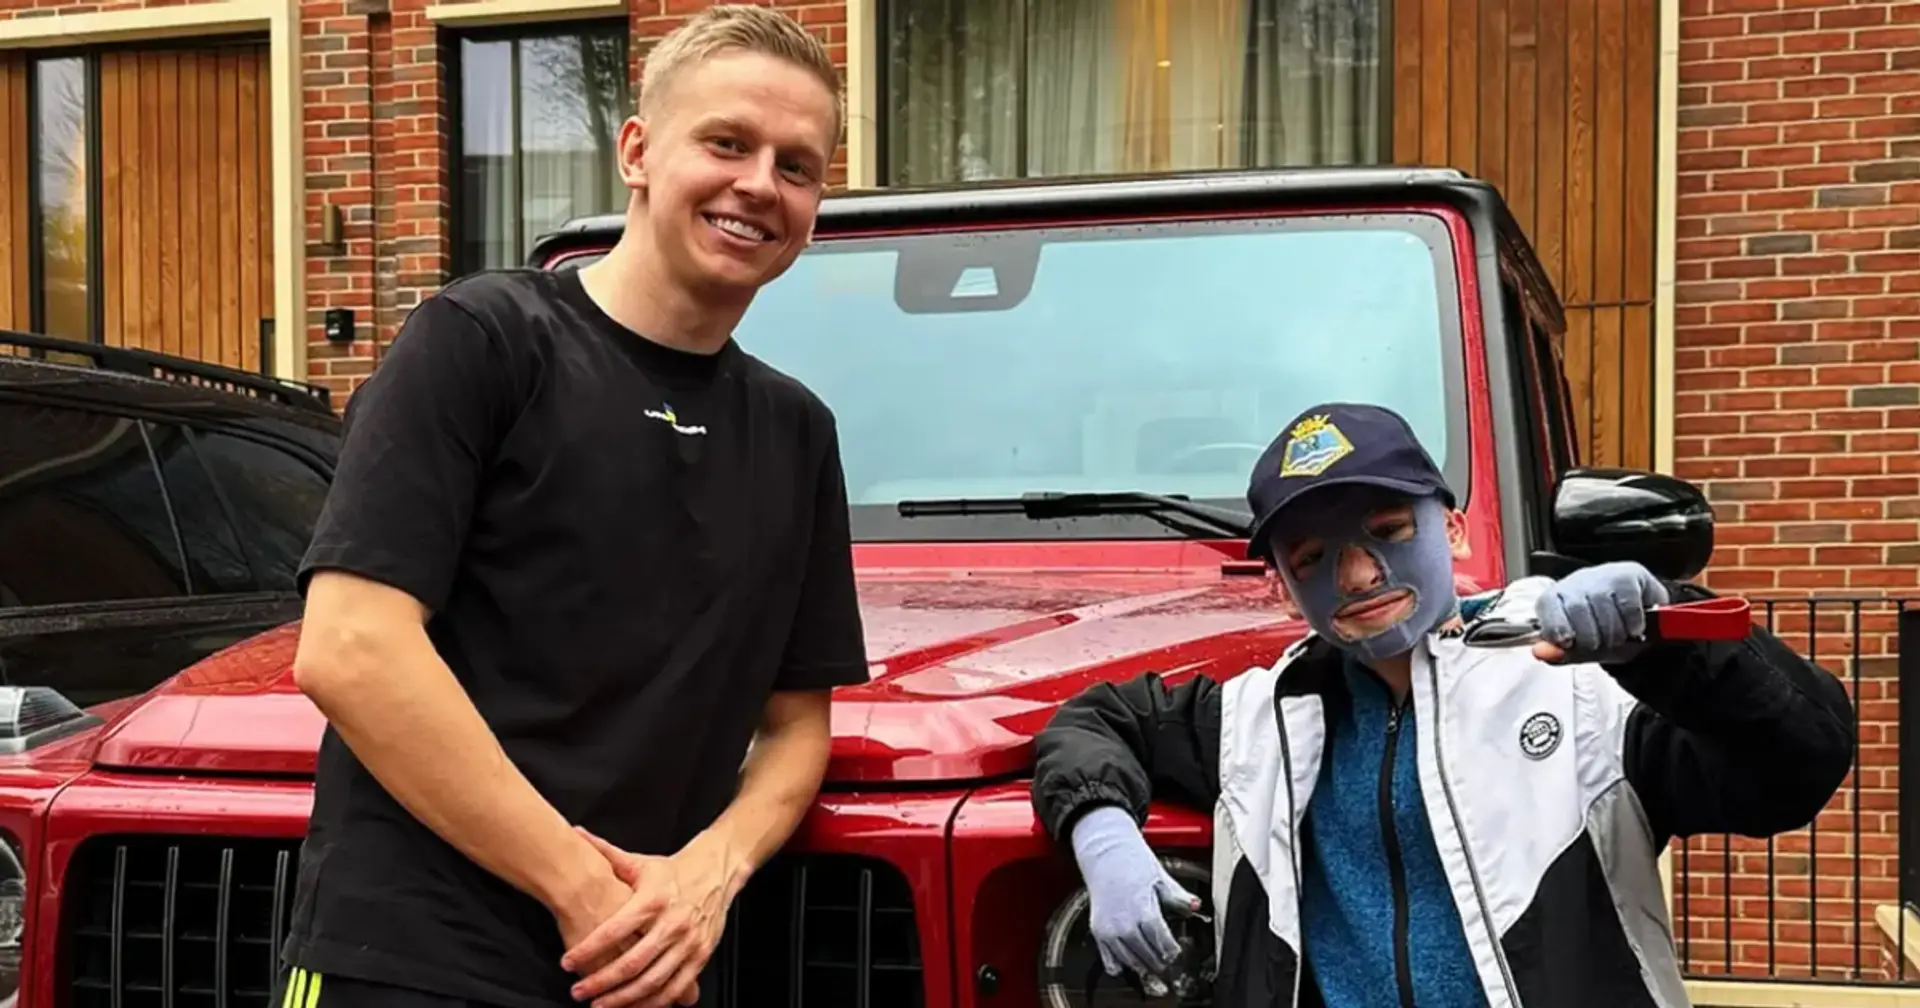 Zinchenko supported a boy from Vinnytsia who lost his mother during shelling and received severe burns